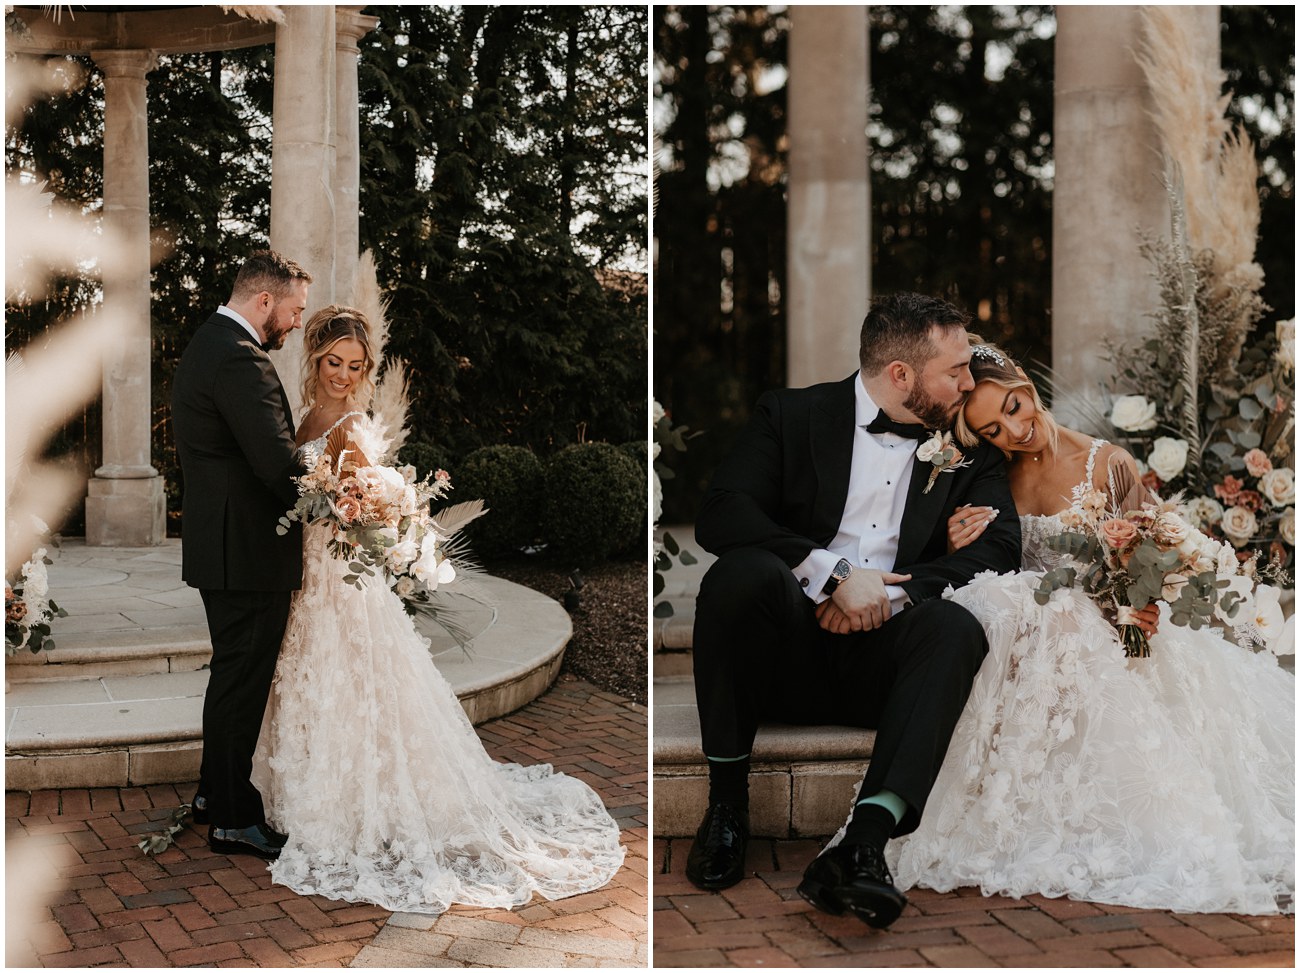 bride and groom portraits at florentine gardens in new jersey